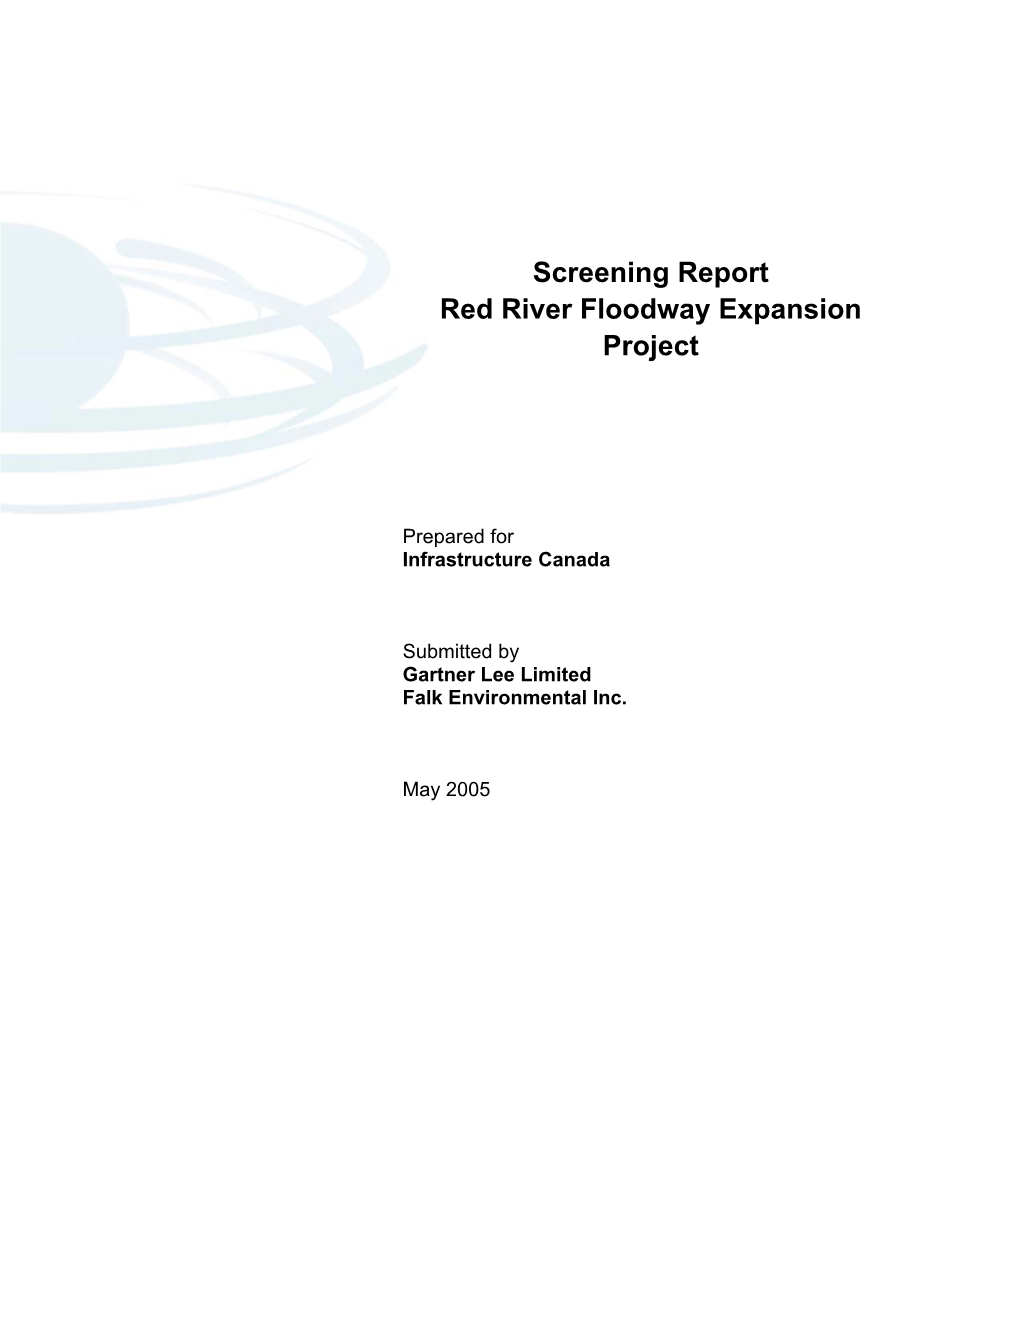 Screening Report Red River Floodway Expansion Project